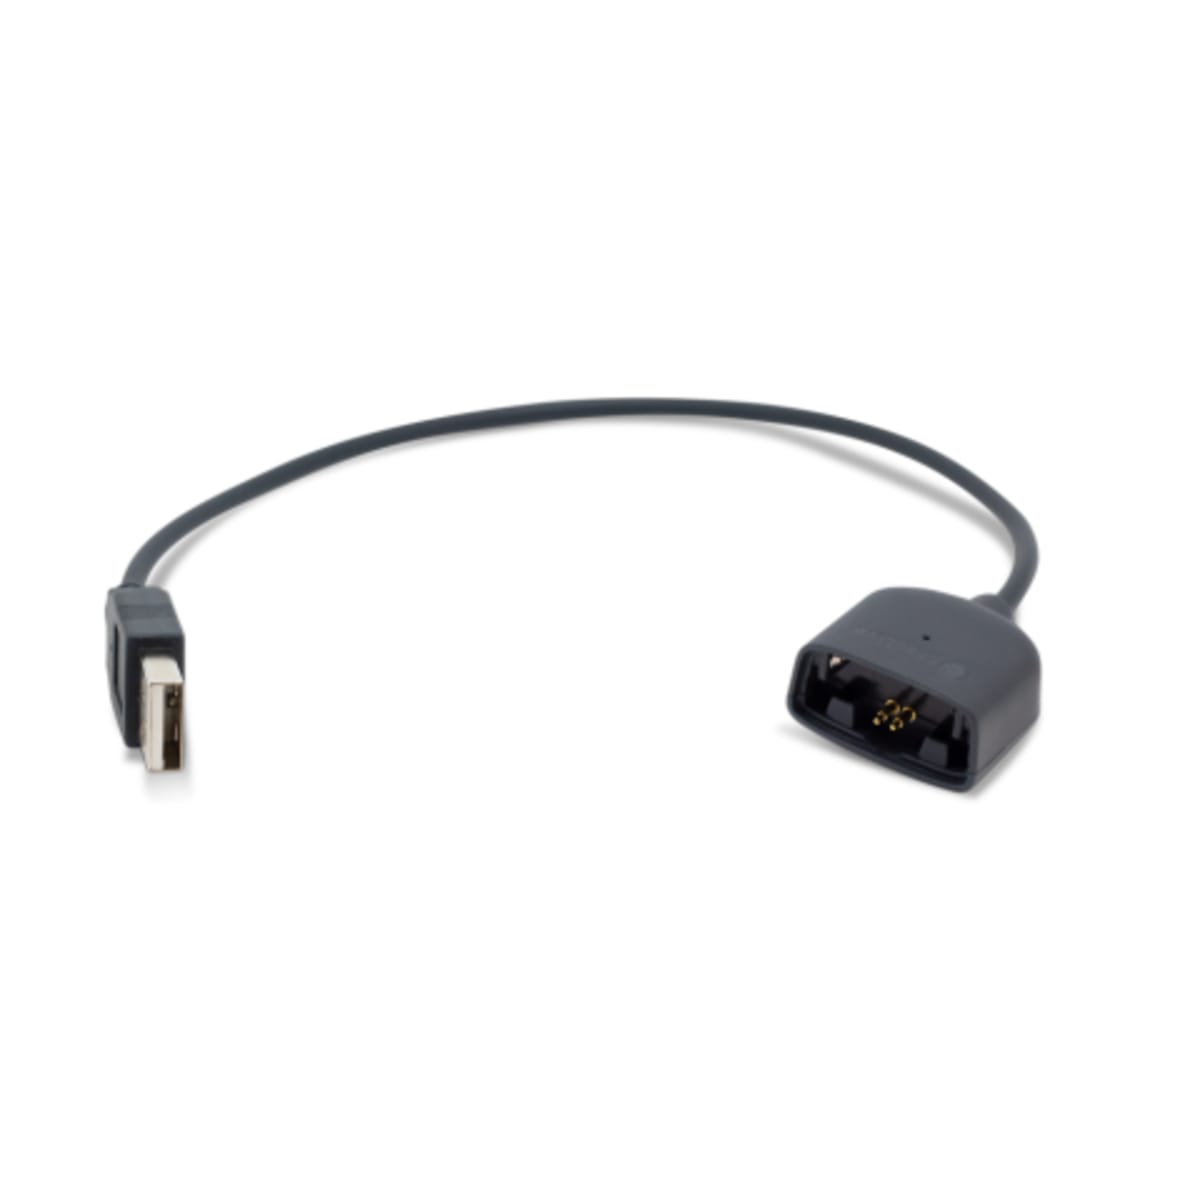 USB cable with charger for Tractive GPS CAT